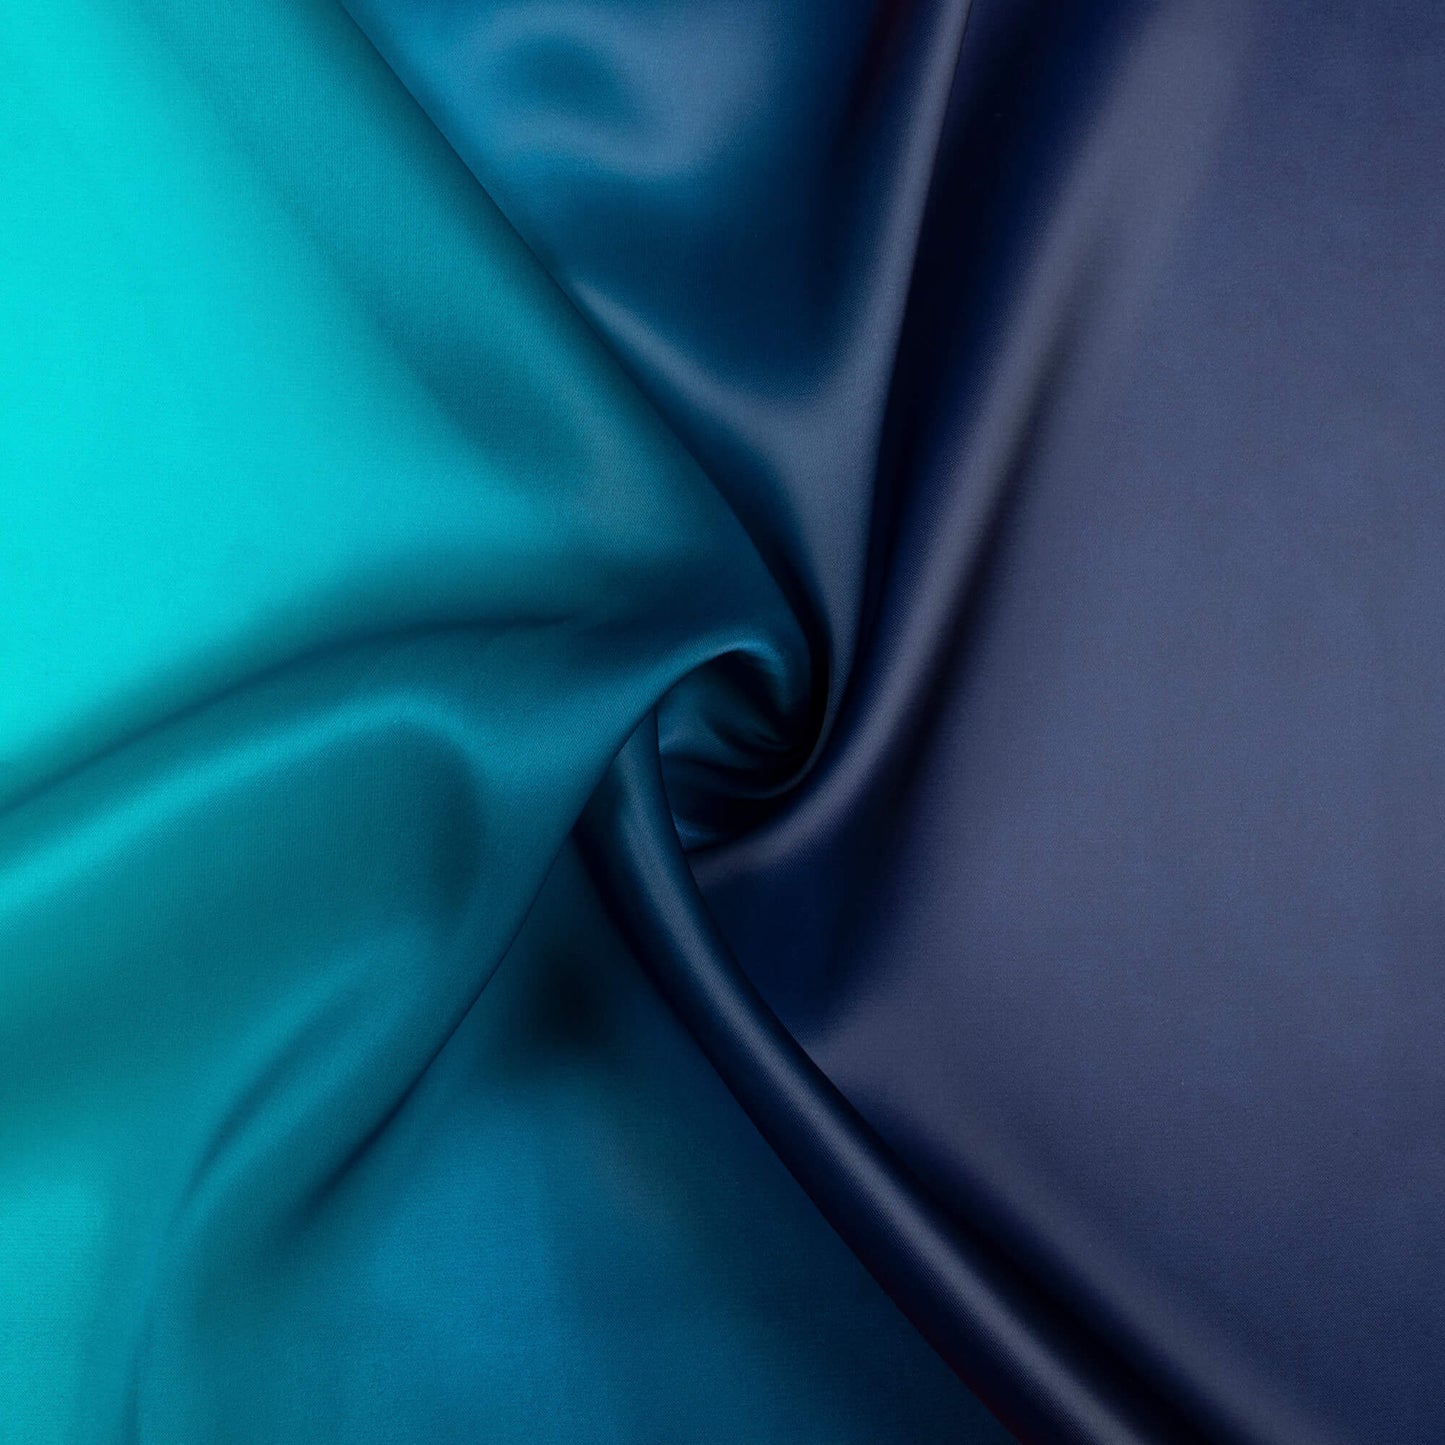 Navy Blue And Turquoise Ombre Pattern Digital Print Organza Satin Fabric